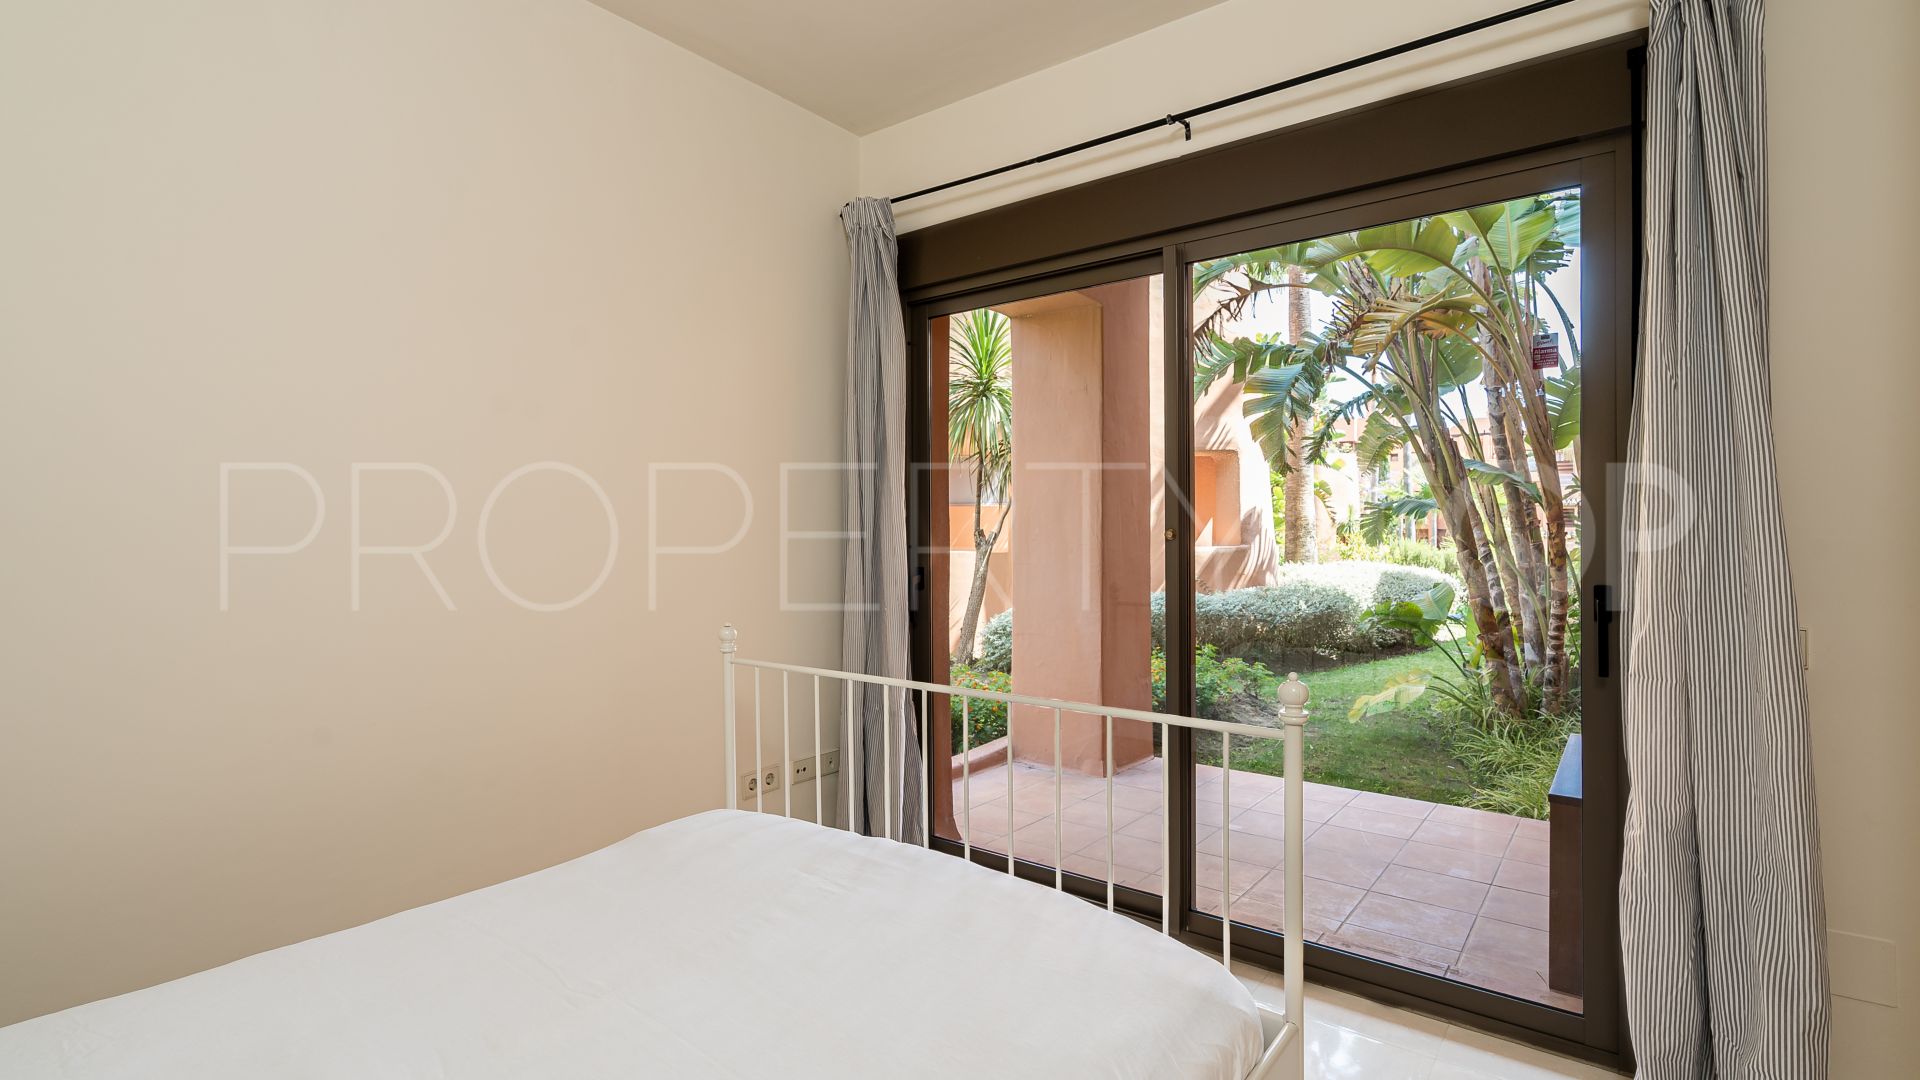 For sale ground floor apartment in Sotoserena